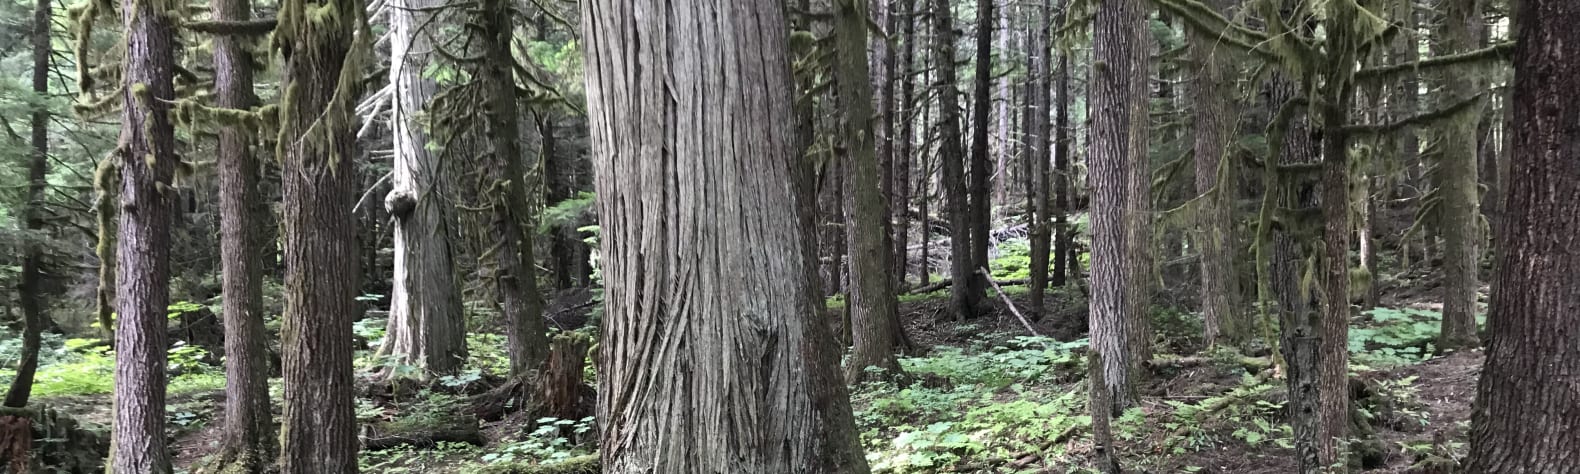 Old Growth Forest in Terrace, BC